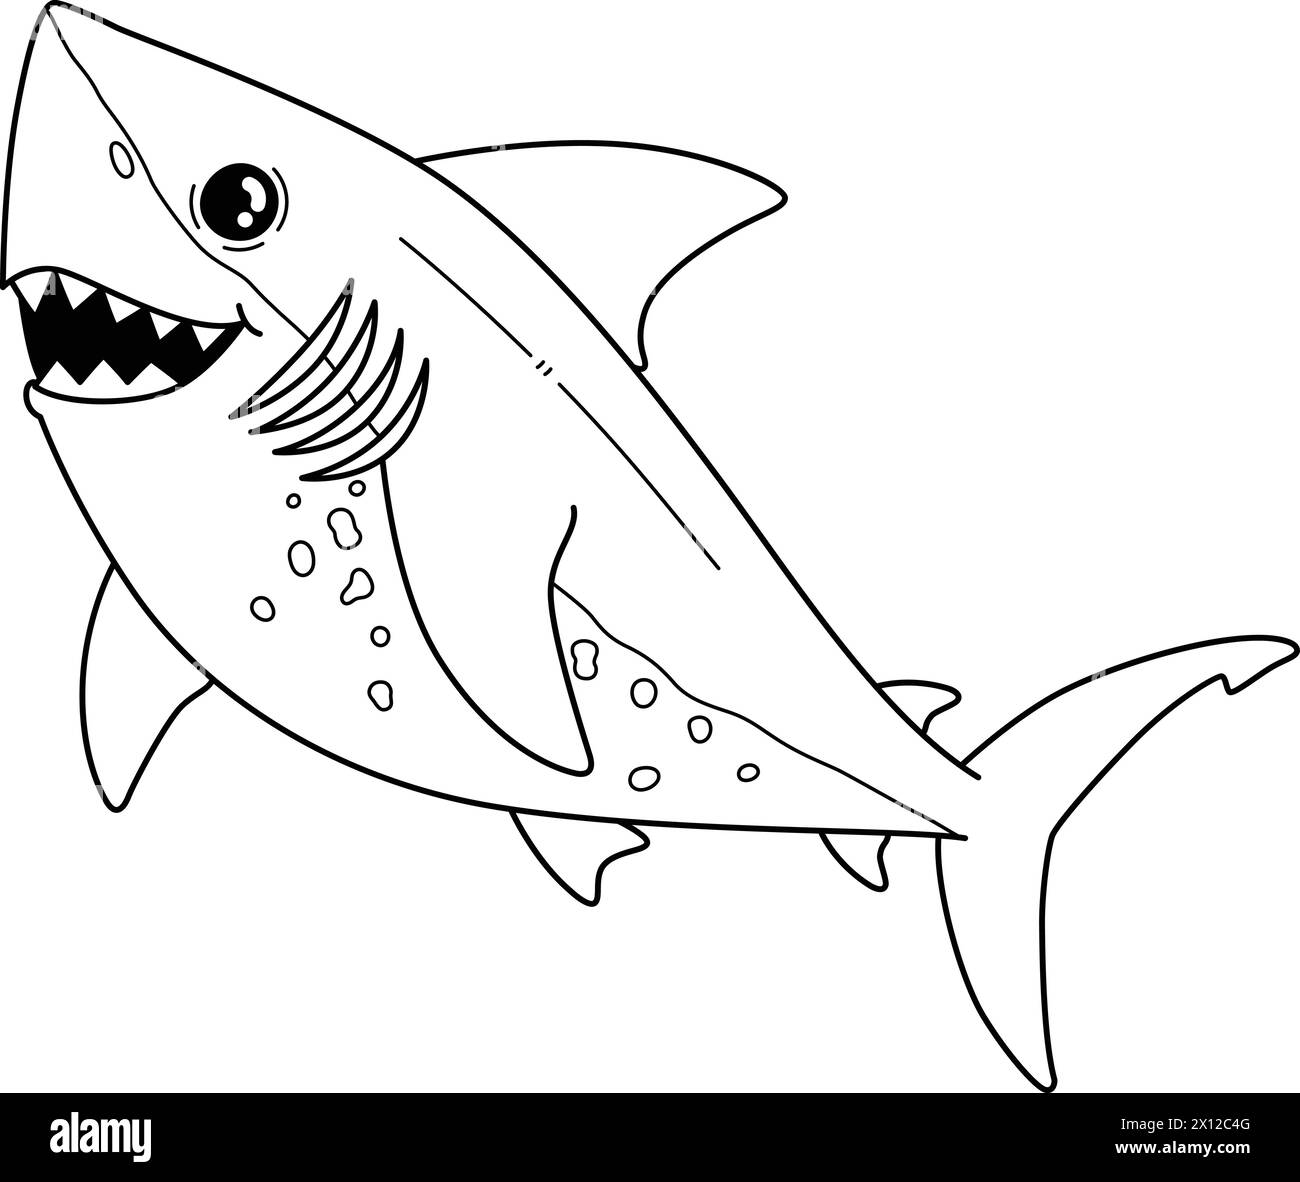 Salmon Shark Isolated Coloring Page for Kids Stock Vector